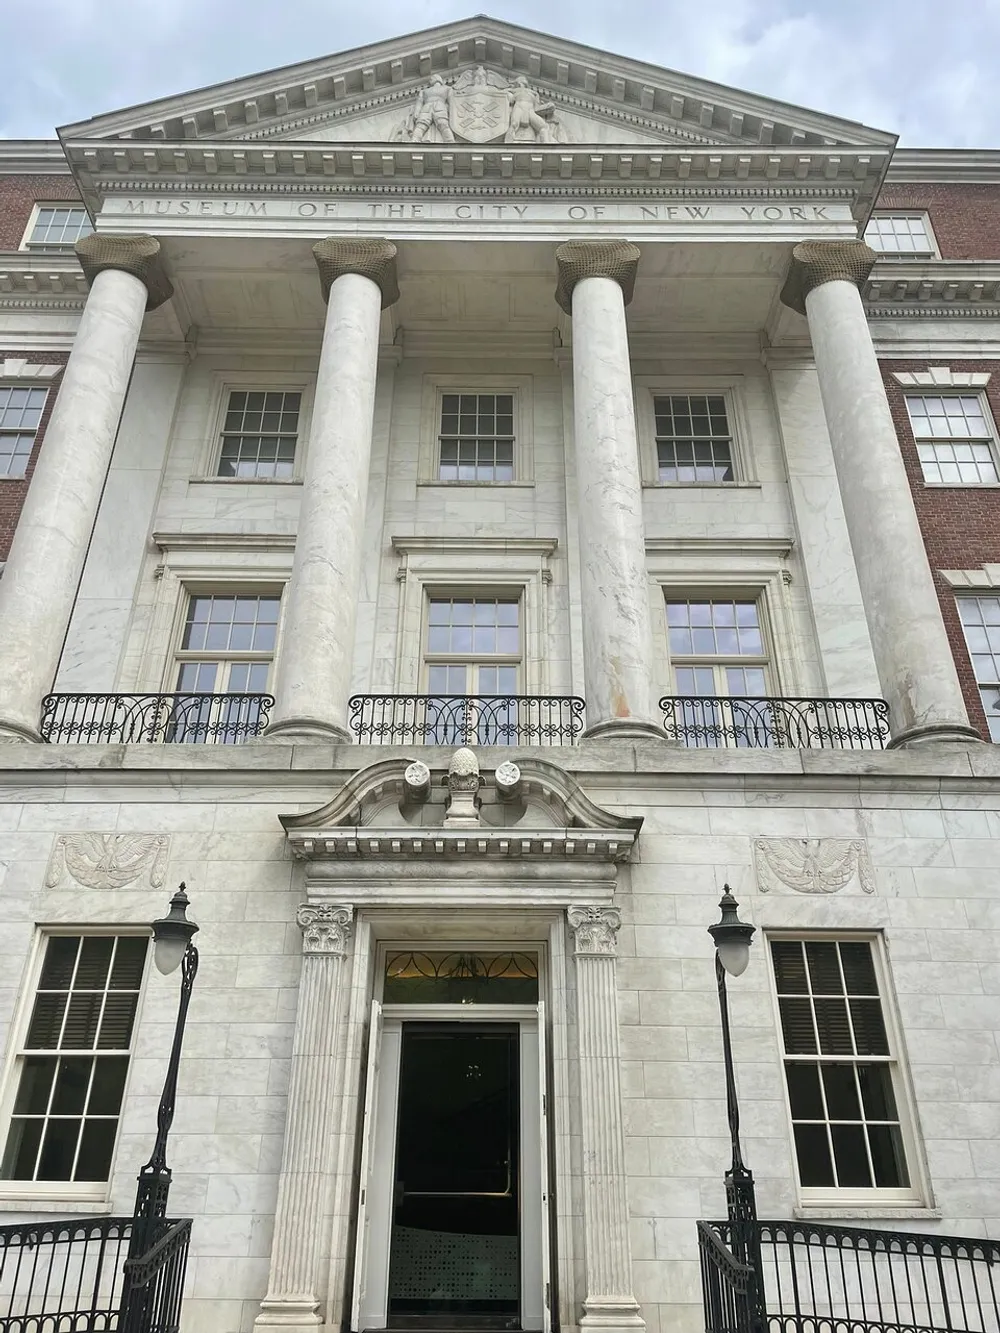 The image shows the neoclassical facade of the Museum of the City of New York with its grand entrance flanked by towering columns and inscription above